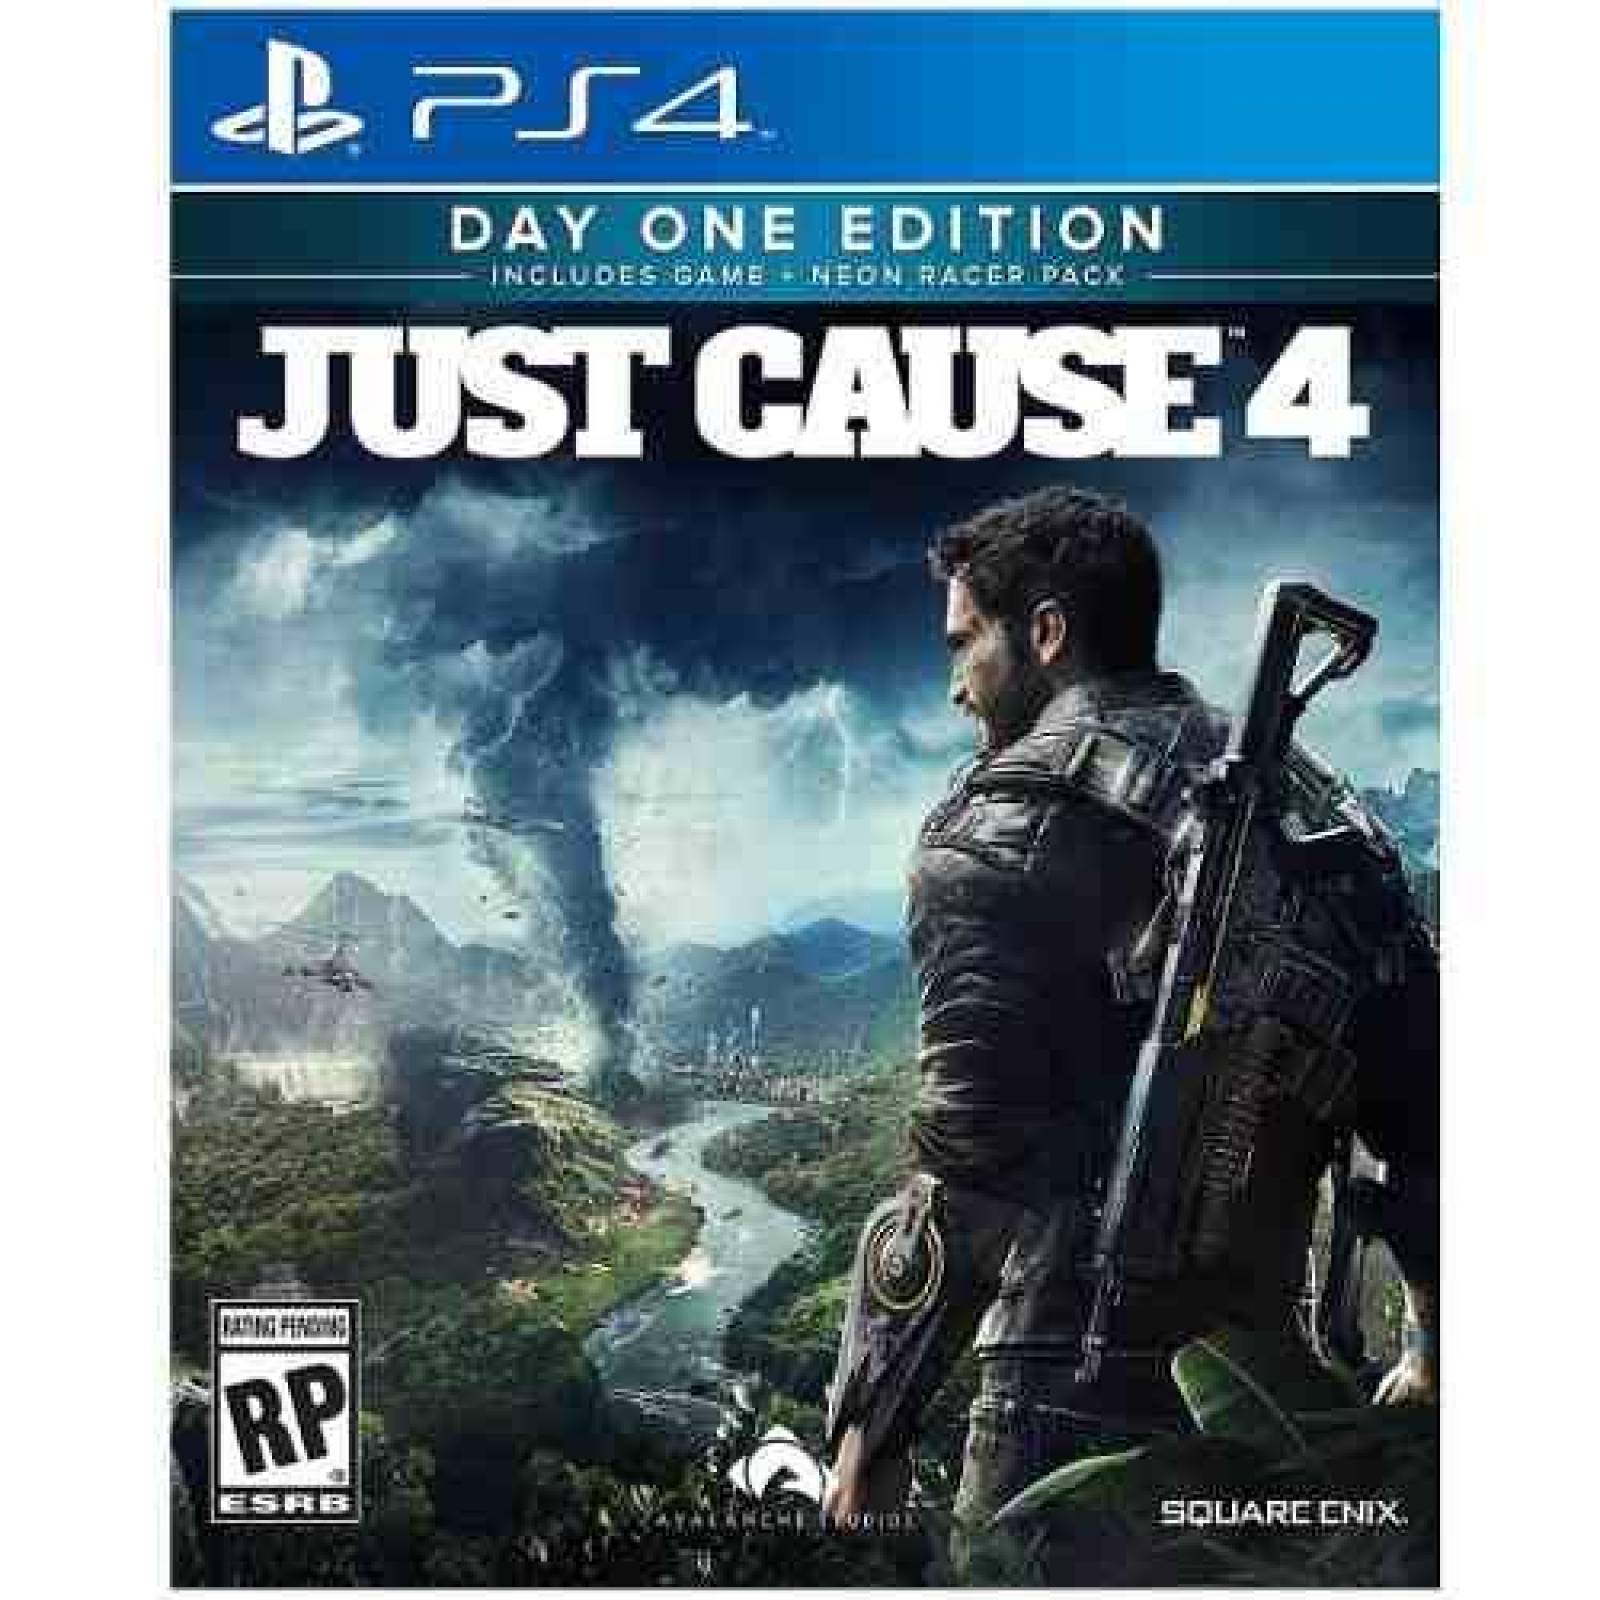 JUST CAUSE 4 DAY ONE LIMITED EDITION PS4 S001 